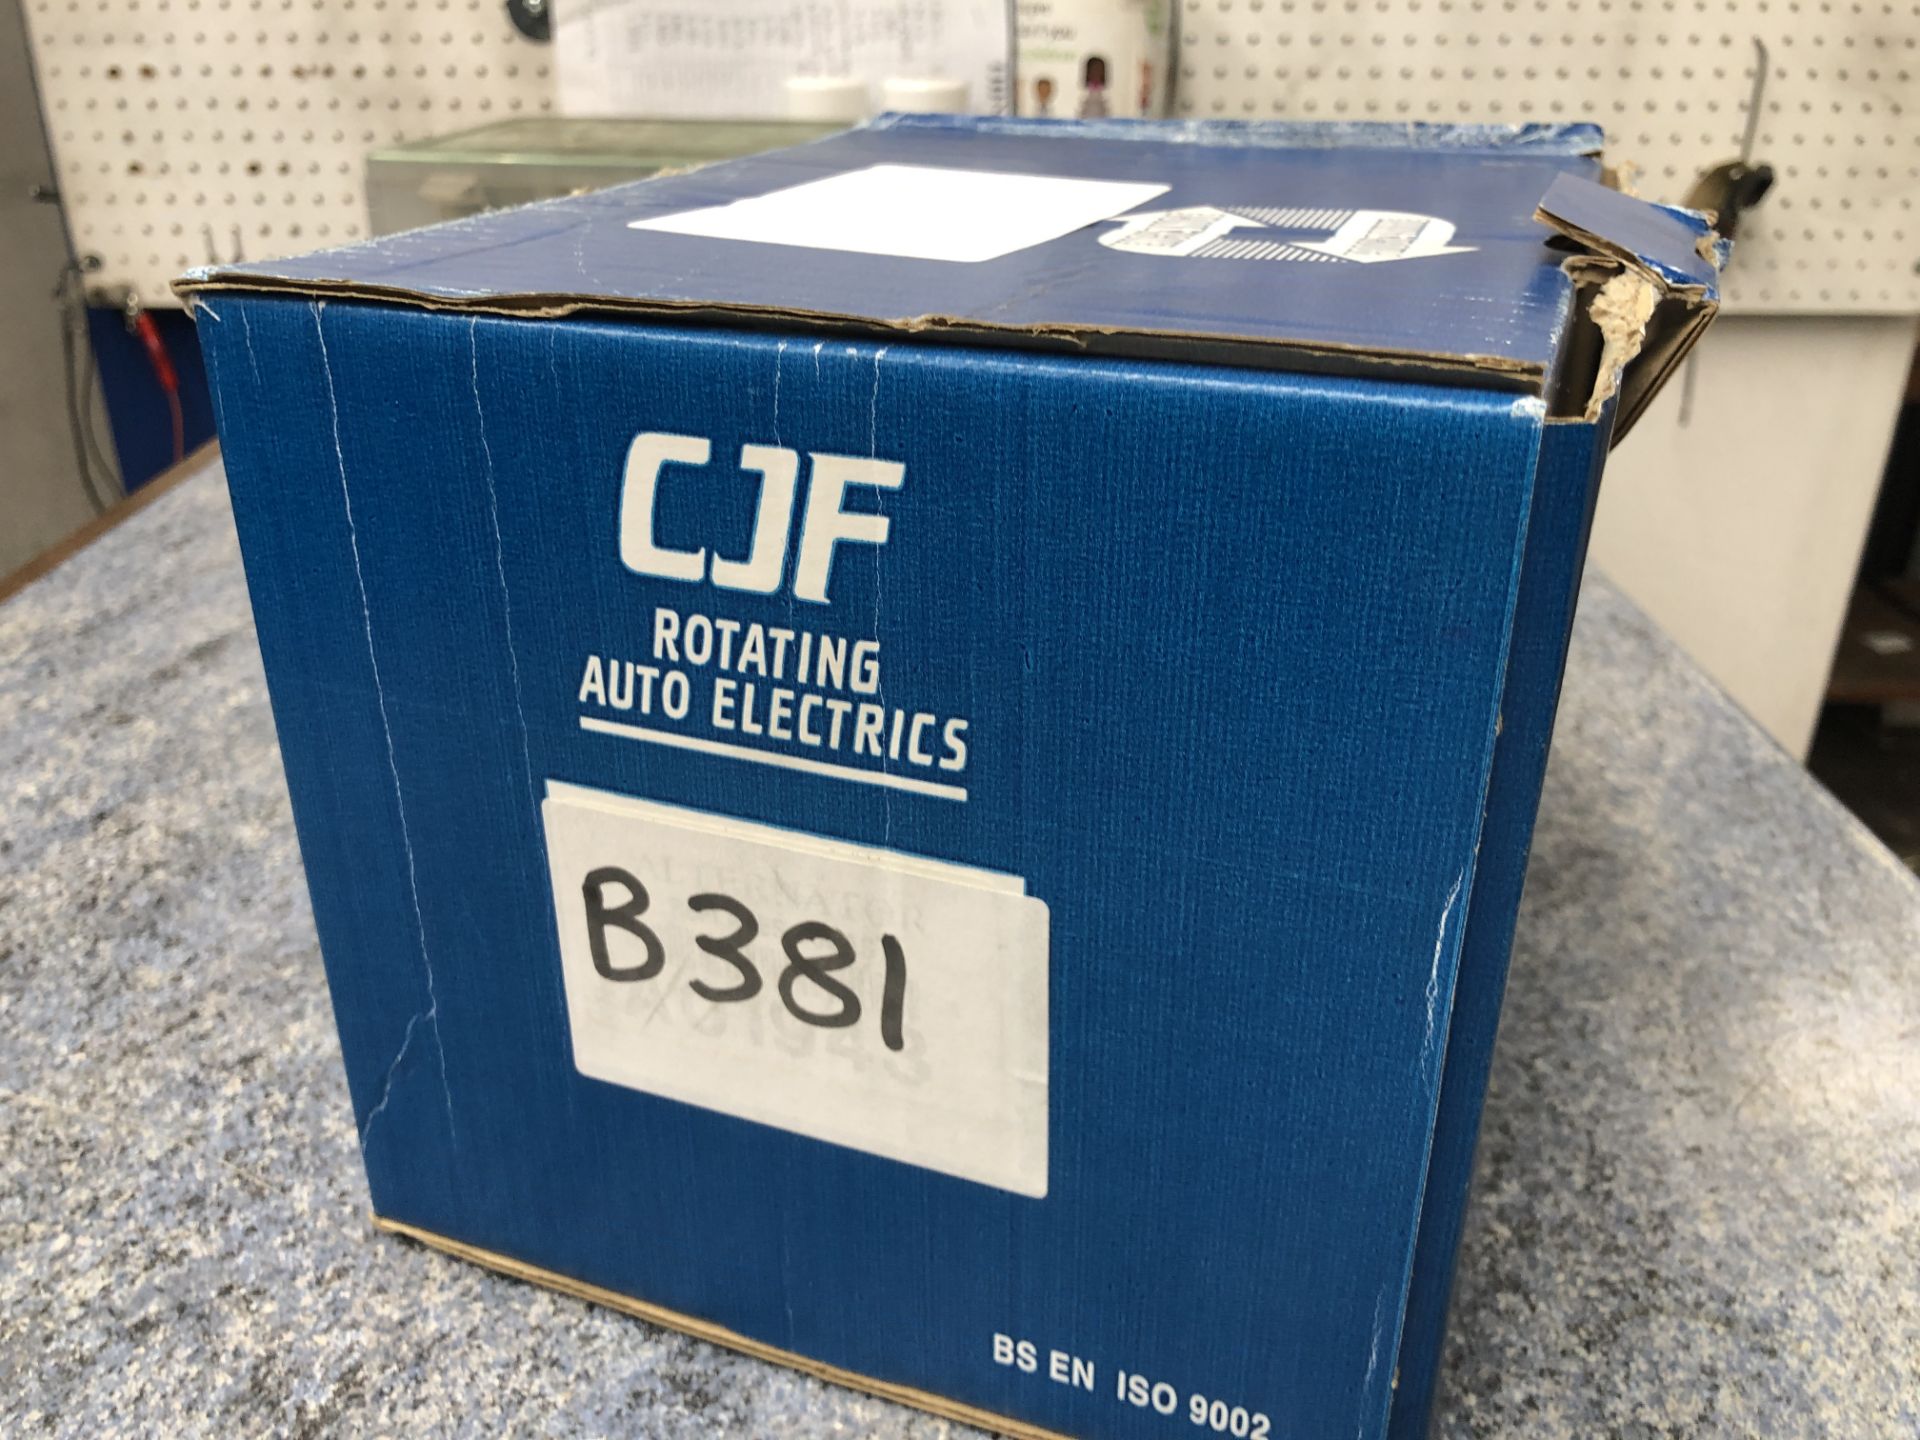 CJF Alternator B381 - - Collection By Appointment on Wednesday 12th June 2019) - Image 2 of 4